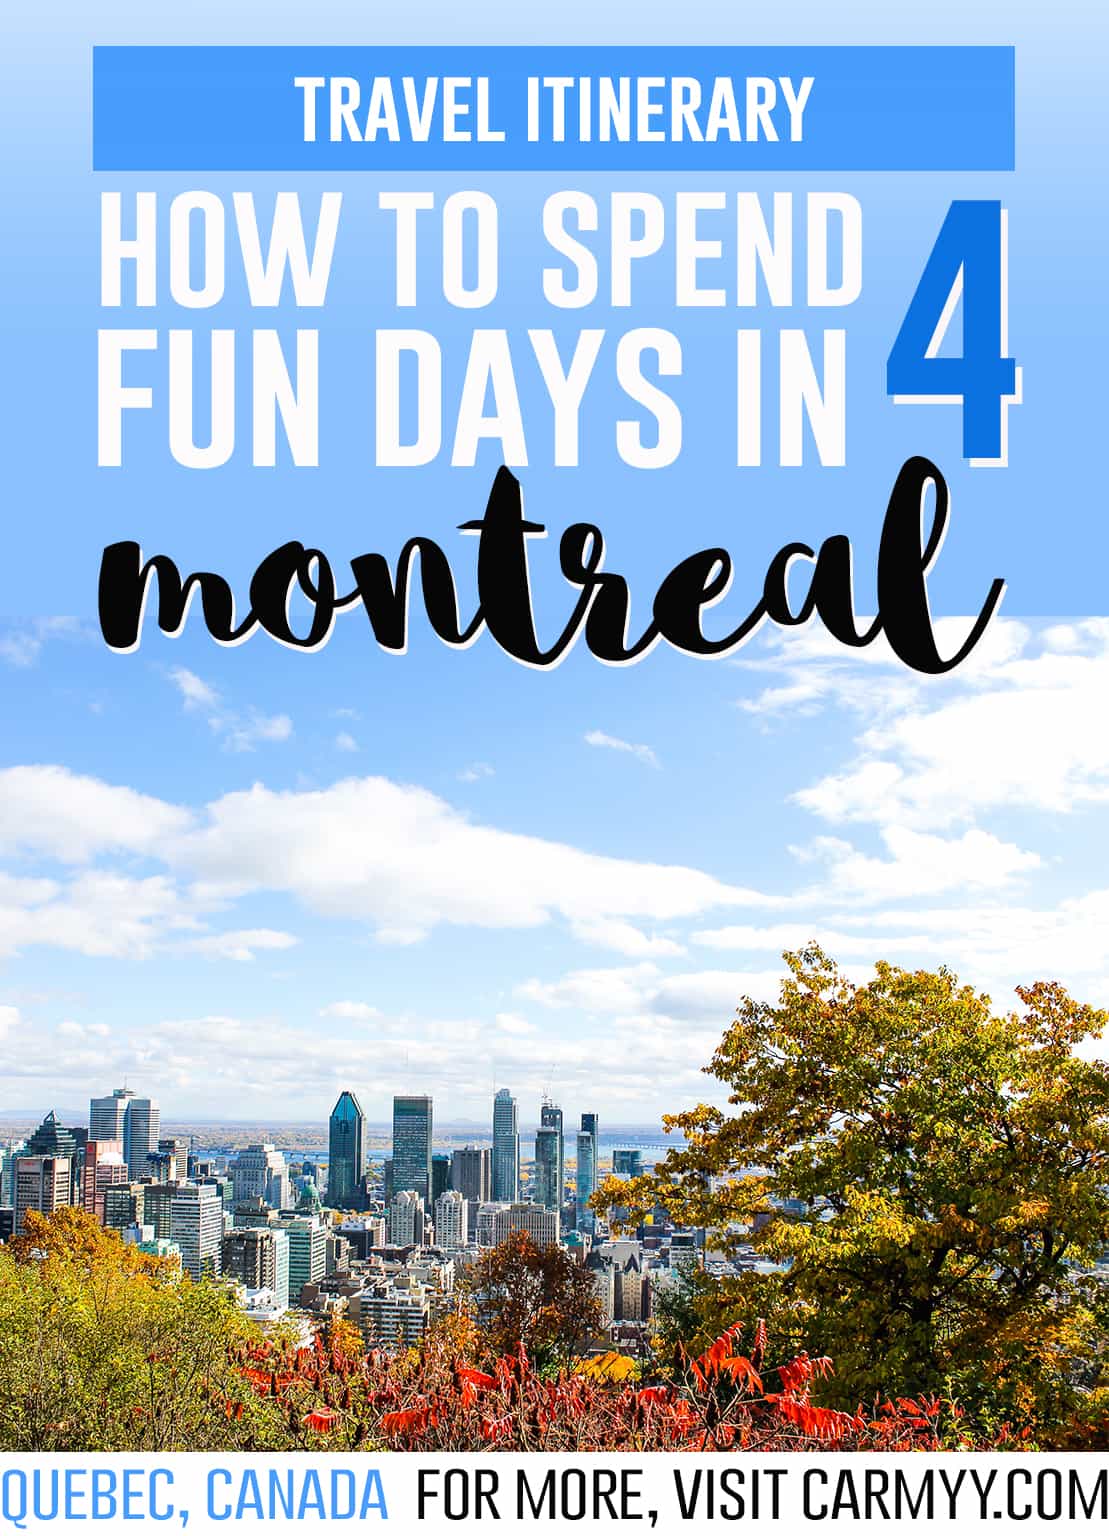 How to Spend 4 Days in Montreal